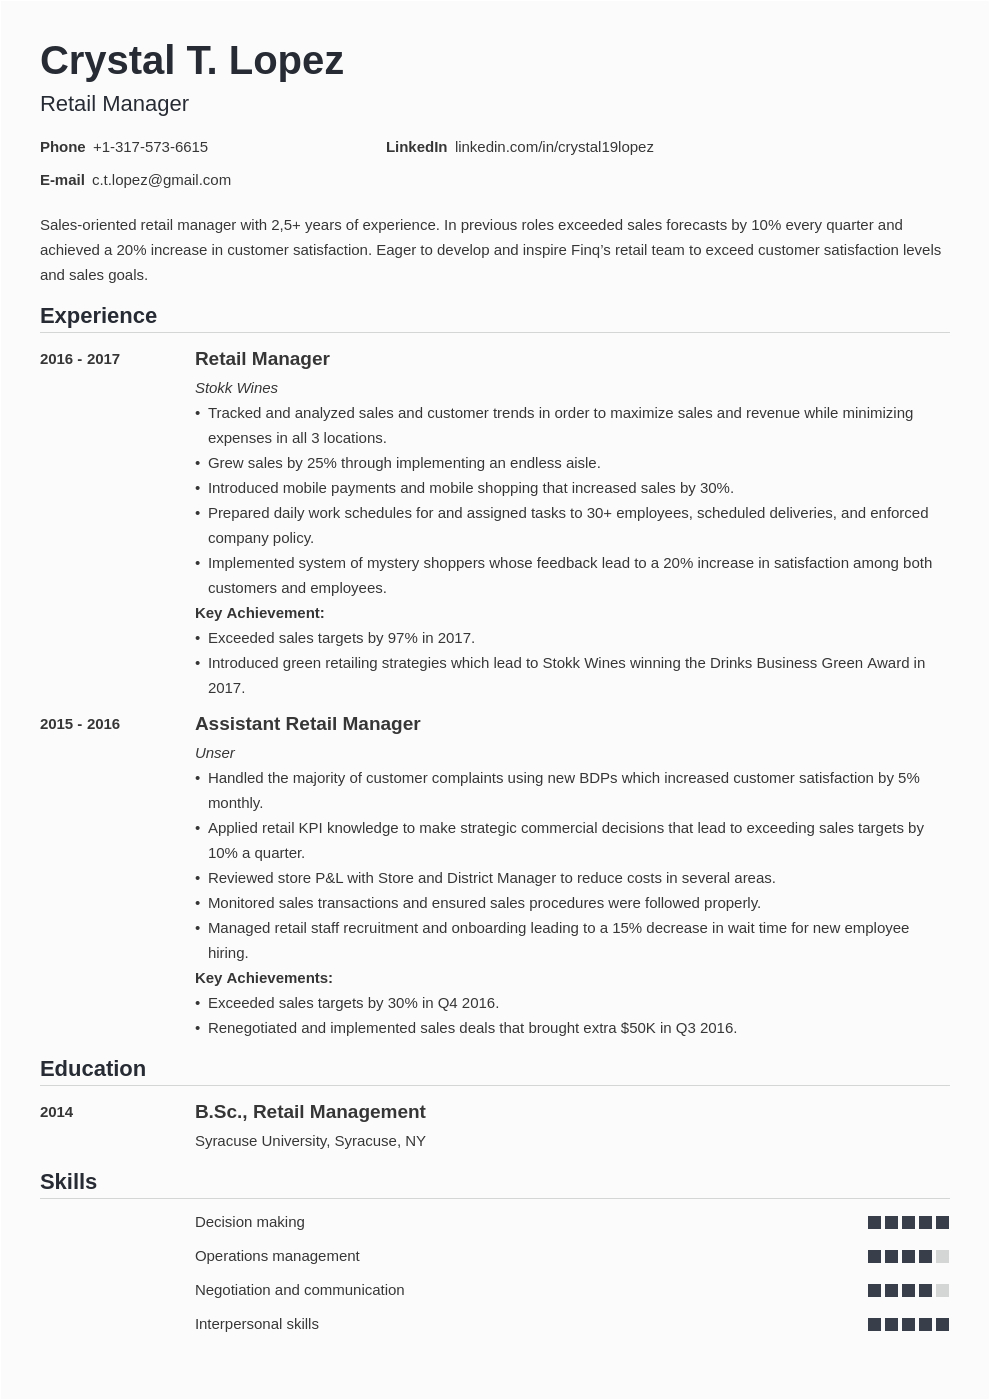 Sample Resume for Retail Management Position Retail Manager Resume Examples with Skills & Objectives